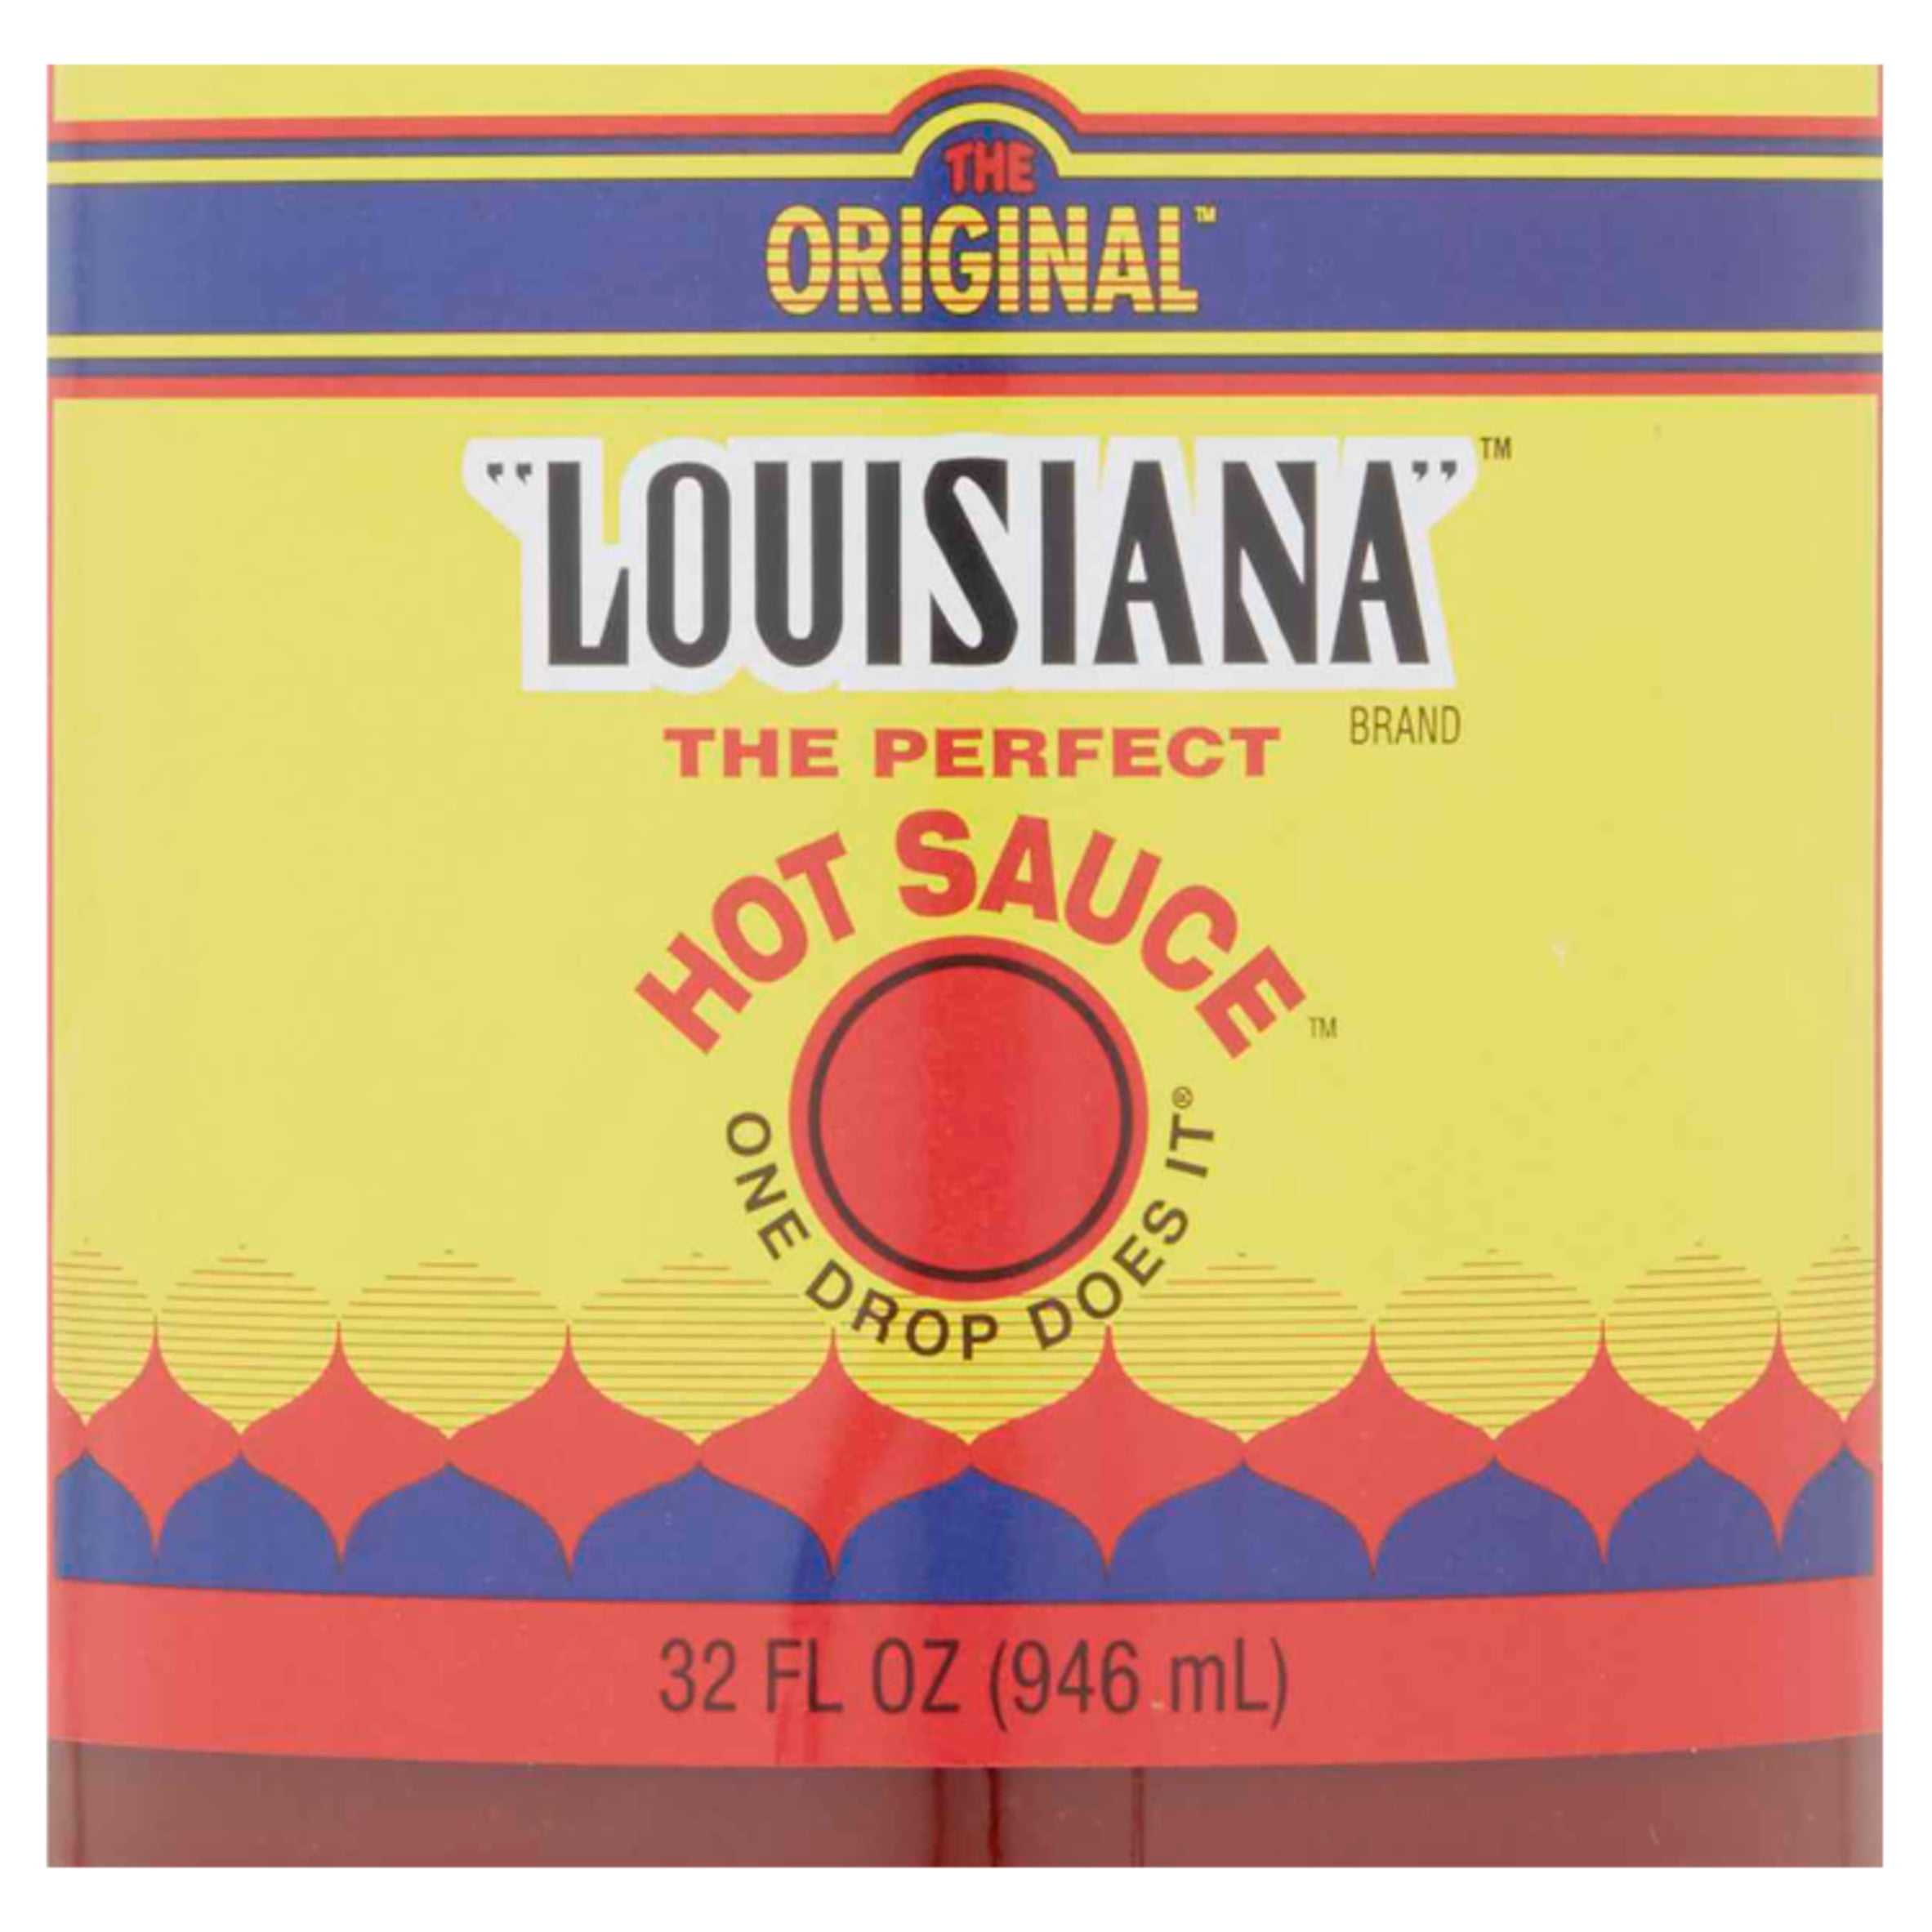 Louisiana Brand The Perfect Roasted Flavor Hot Sauce, Roasted Garlic Hot  Sauce, 17 Servings Per Bottle, Kosher Hot Sauce, 3 FL OZ Bottle (Pack of 4